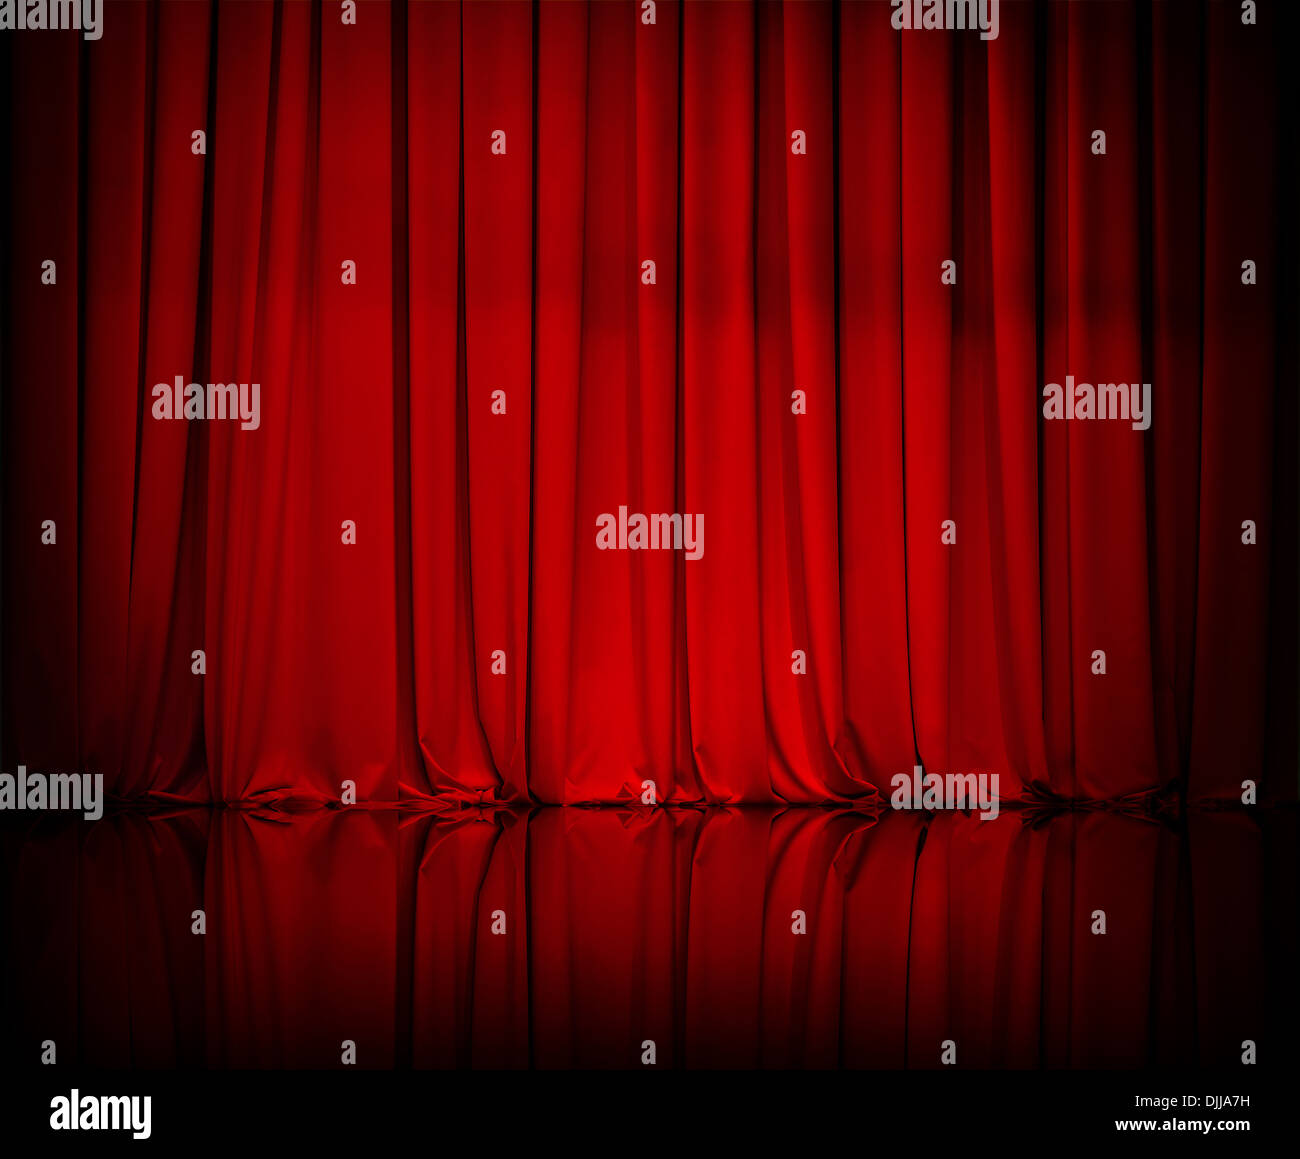 curtain or drapes red background Stock Photo